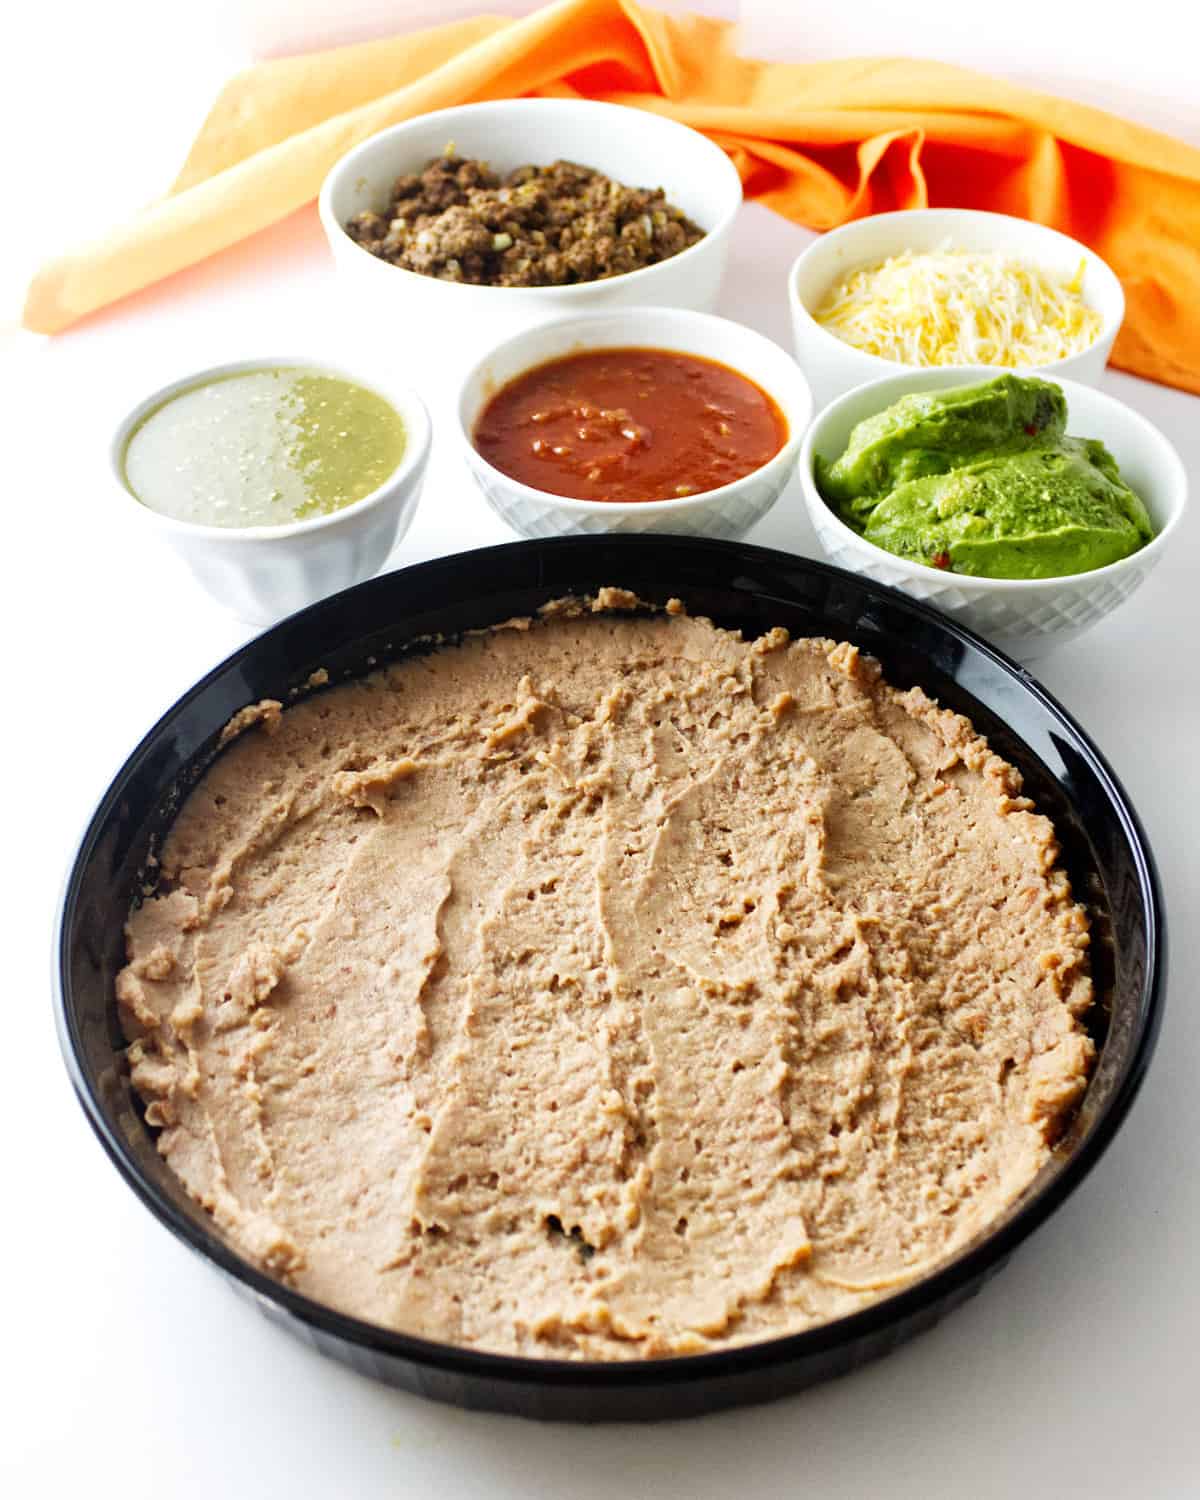 refried beans spread out in a dish.